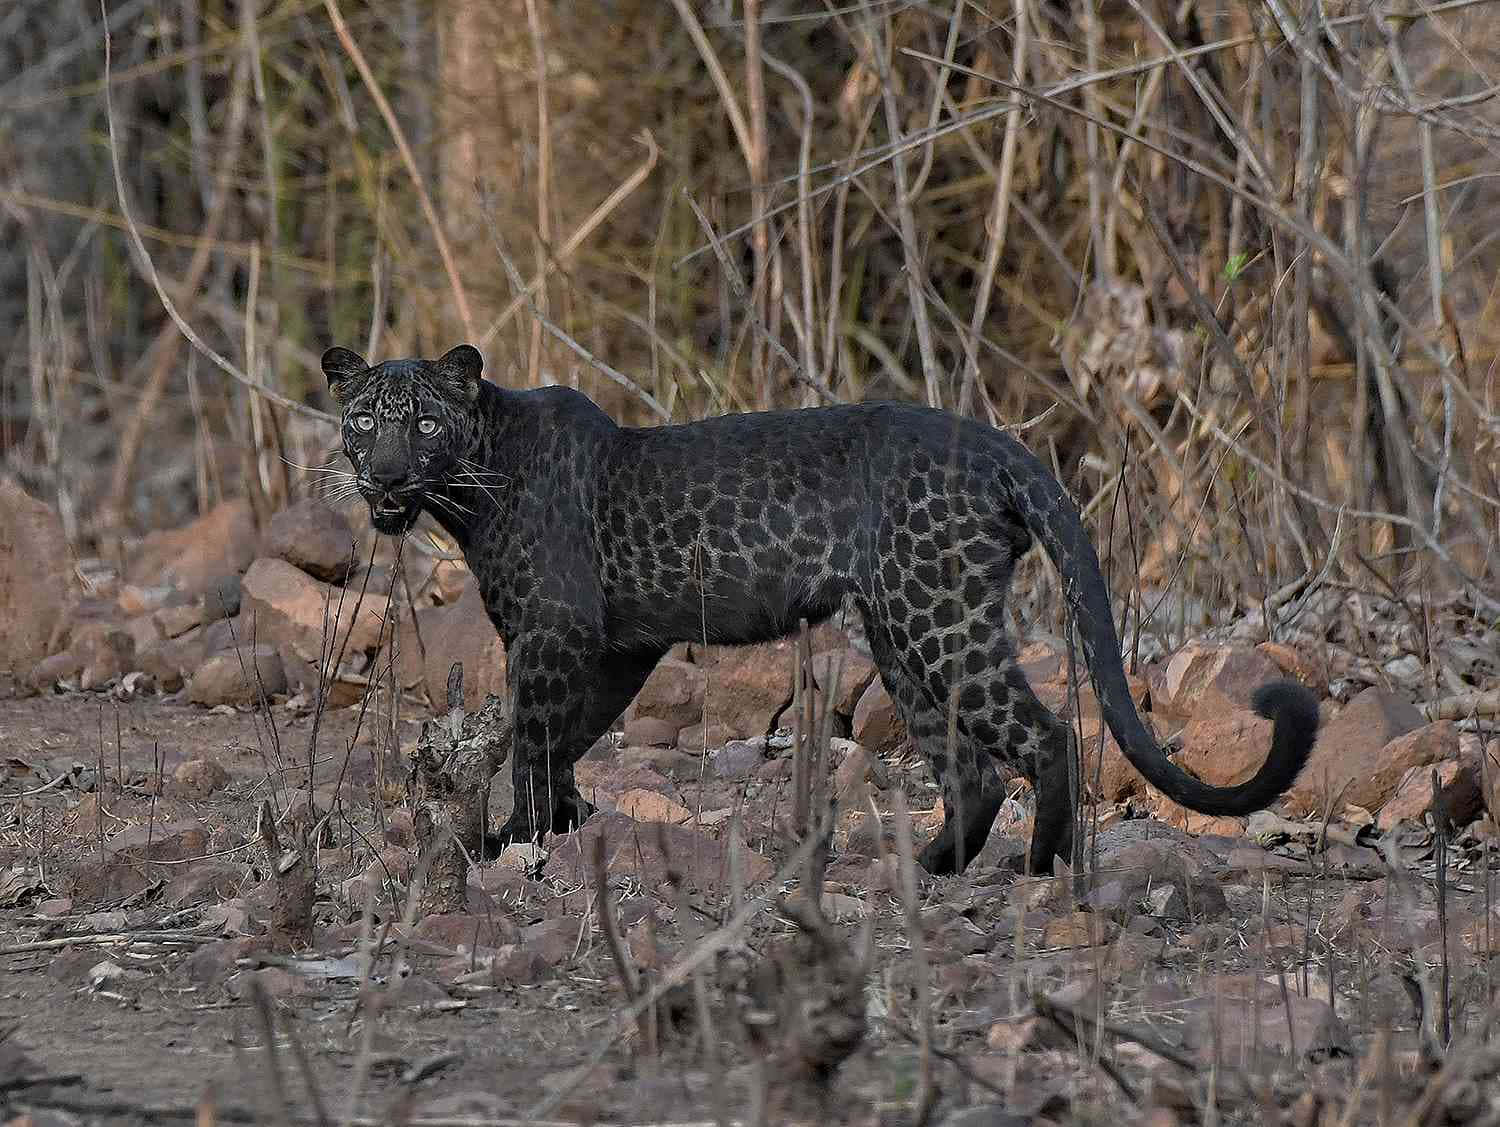 "A Mysterious Black Leopard Caught on Camera" Wallpaper